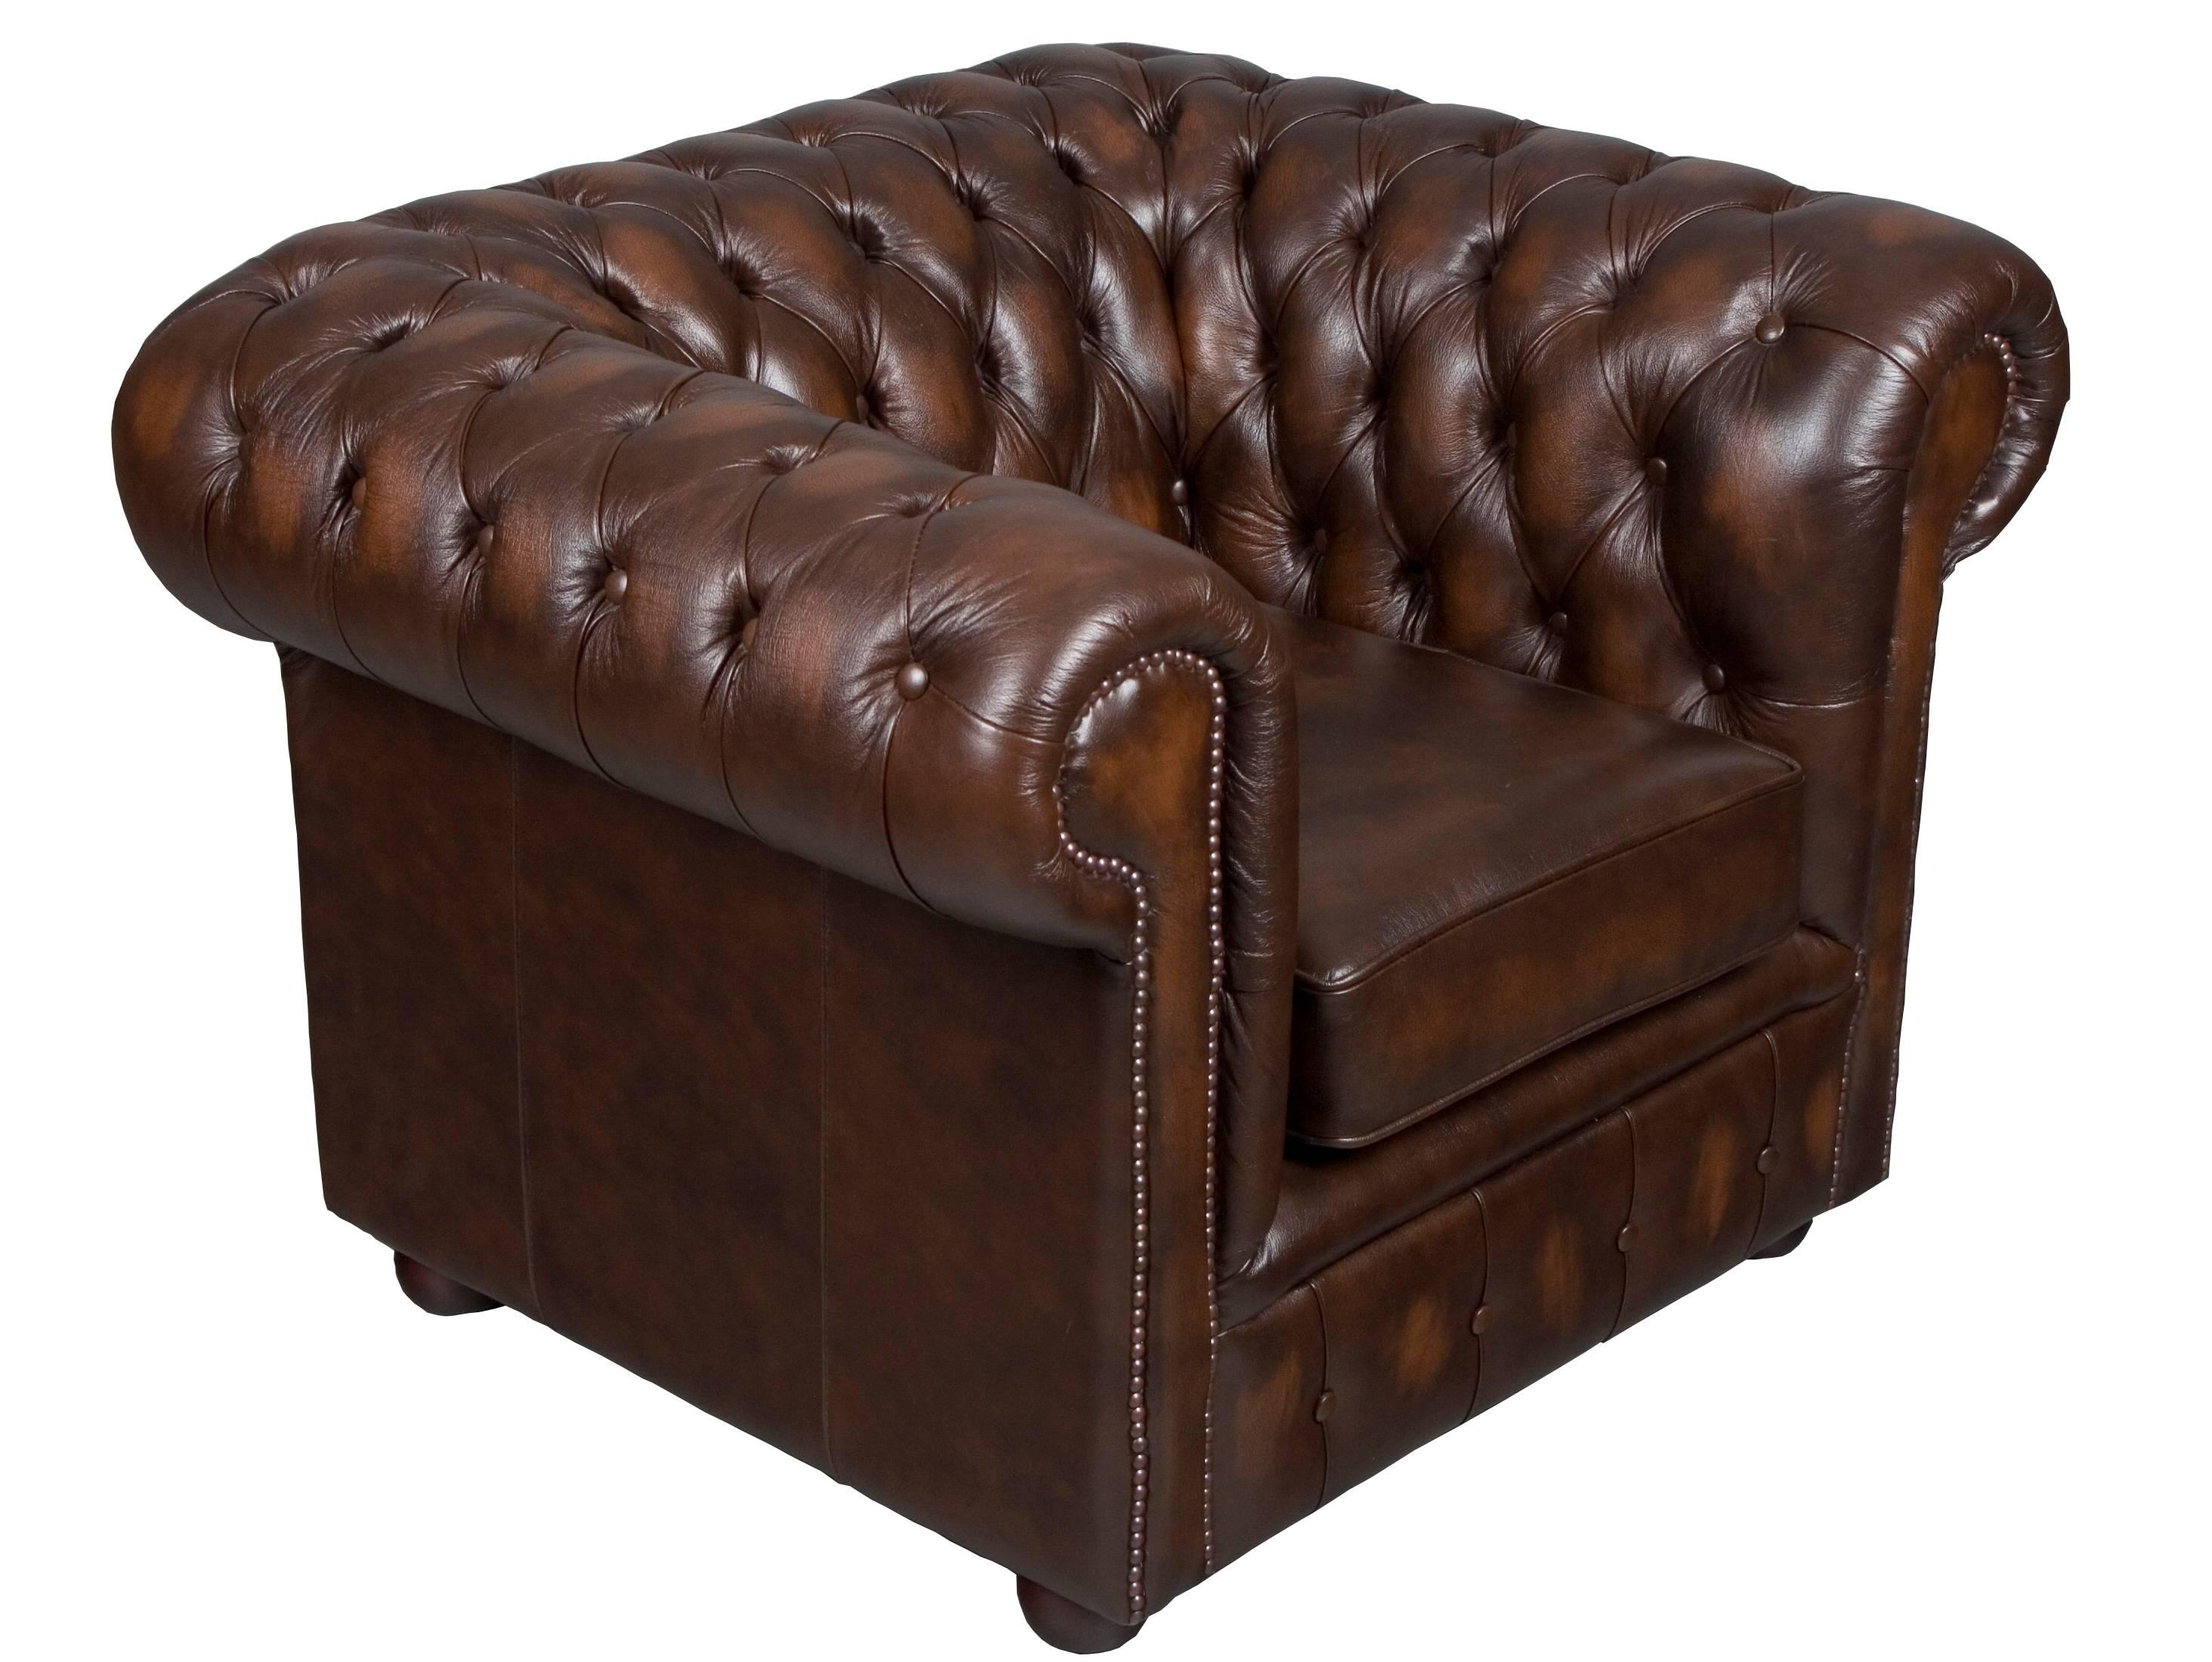 Late 20th Century Tufted Brown Leather Club Chair